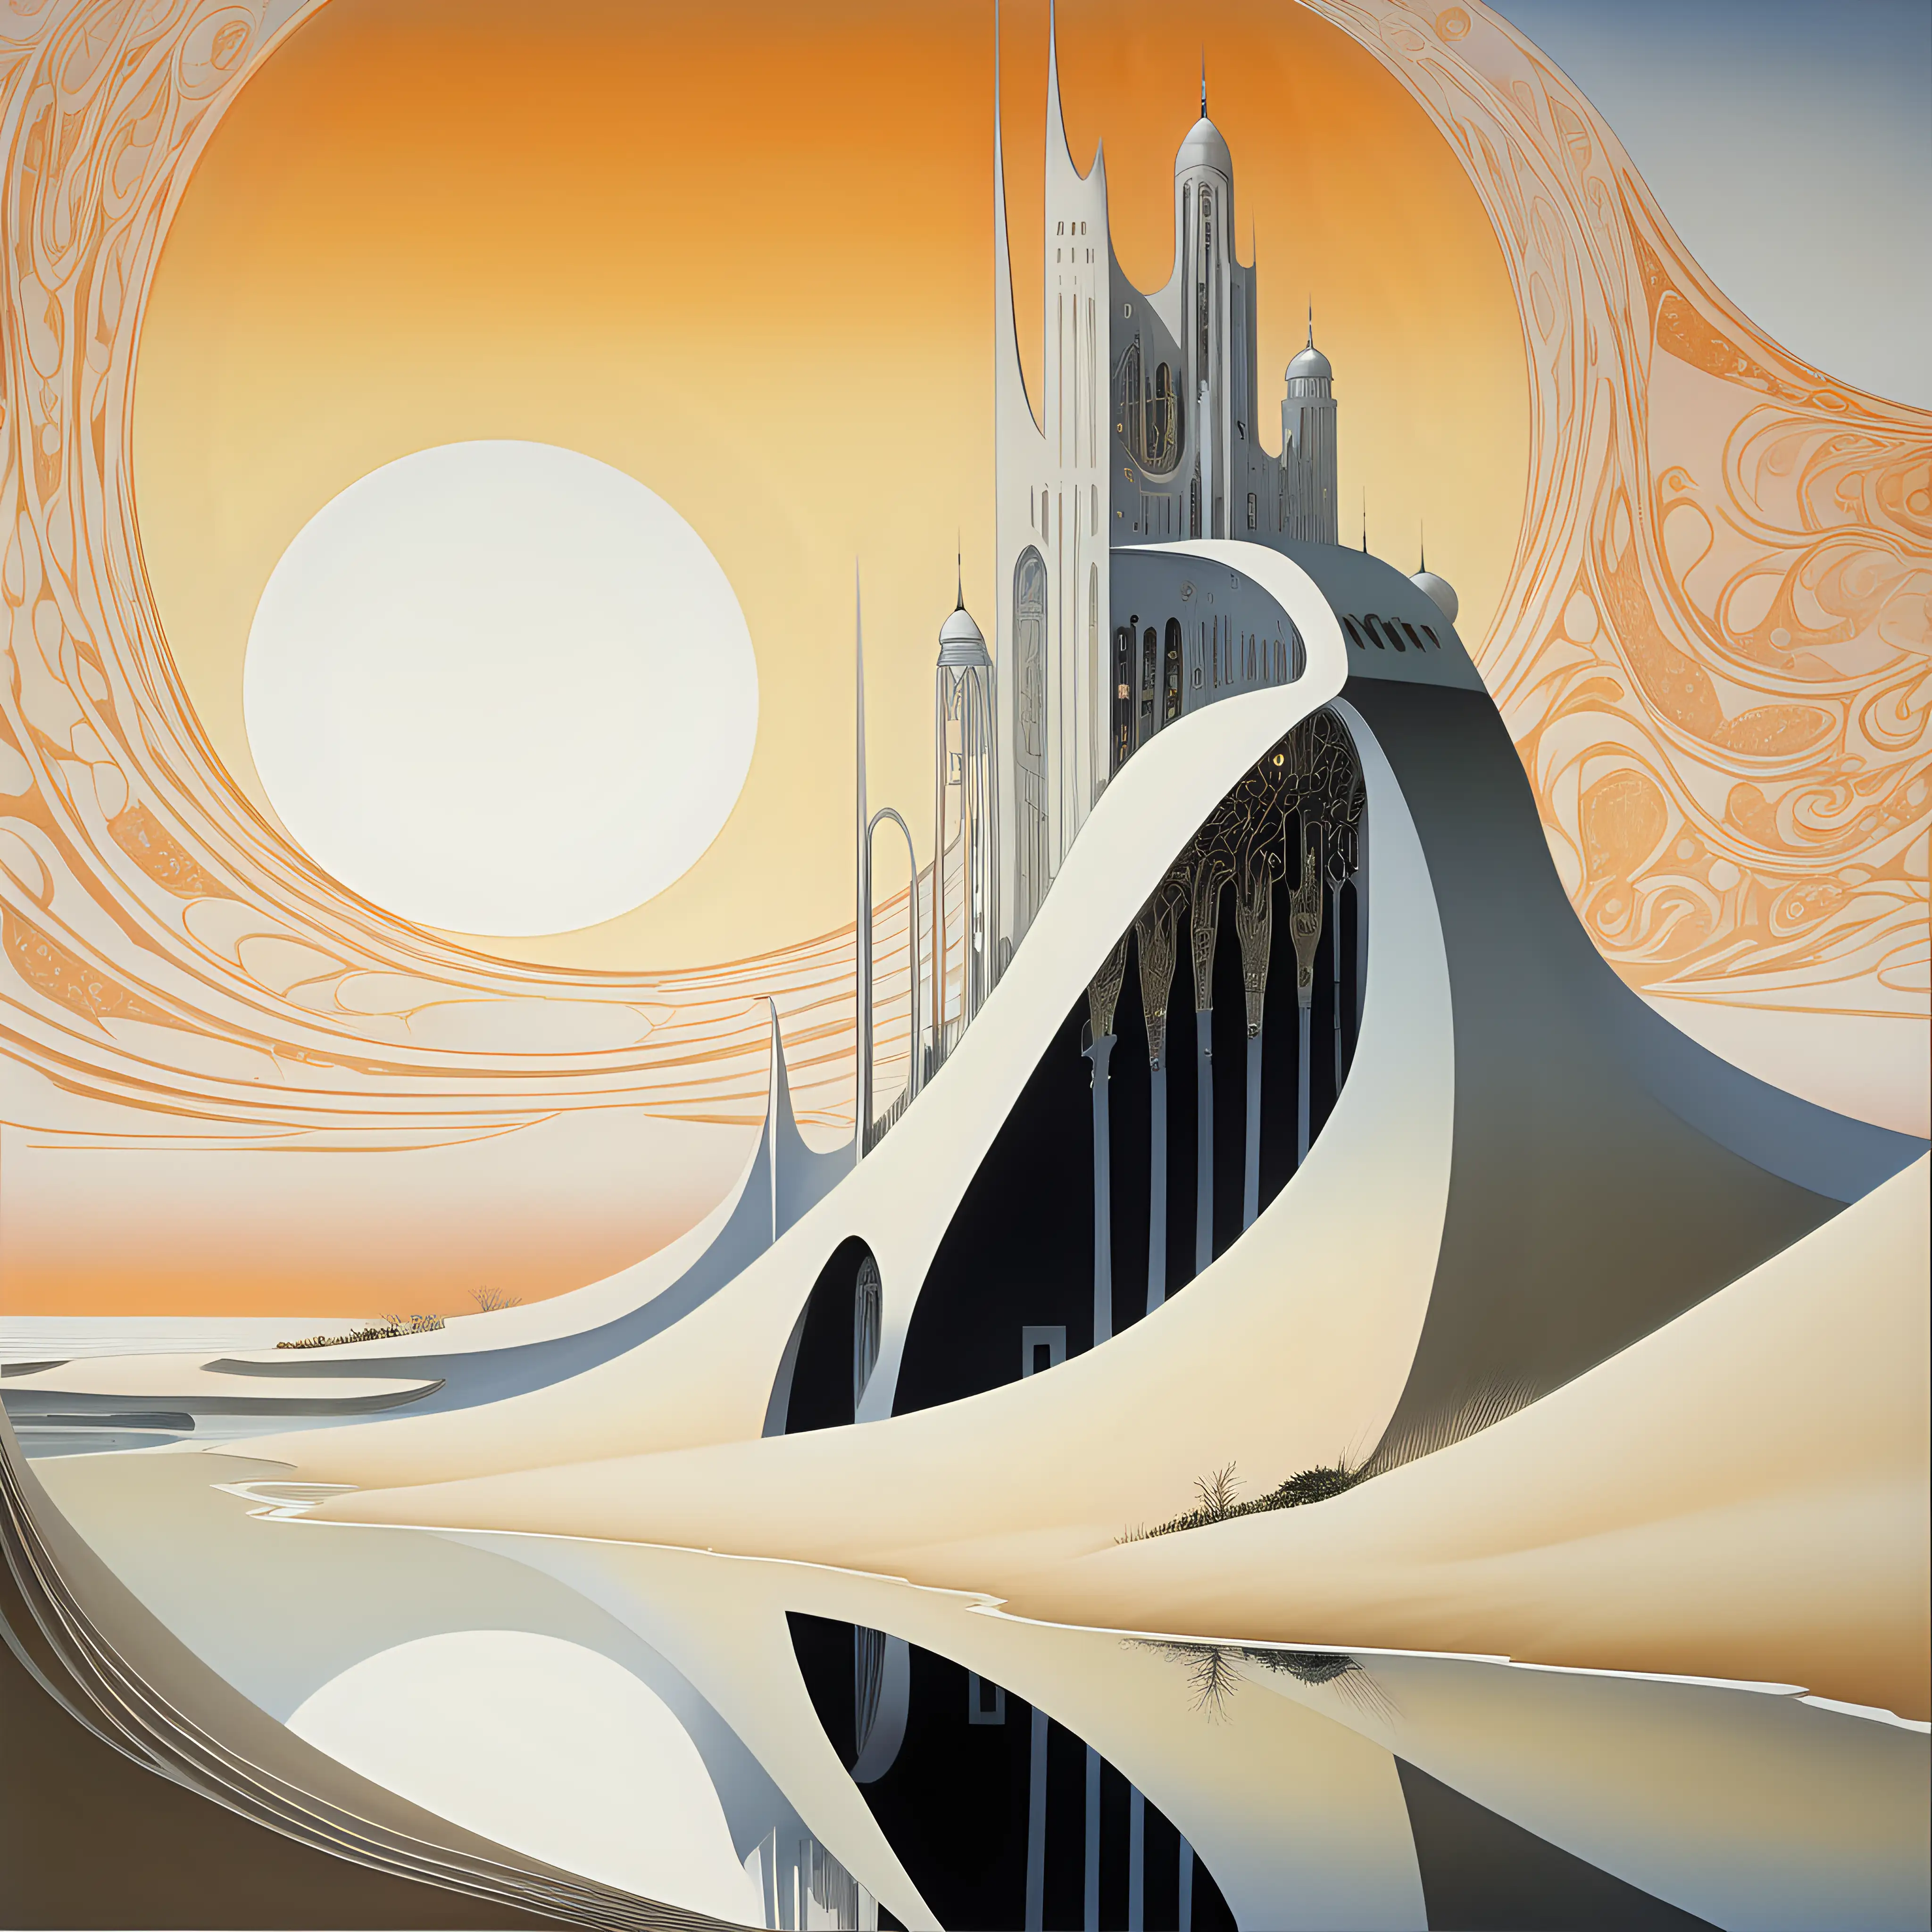 futuristic painting in kay nielsen style of a river dune, sunrise, a building on left side